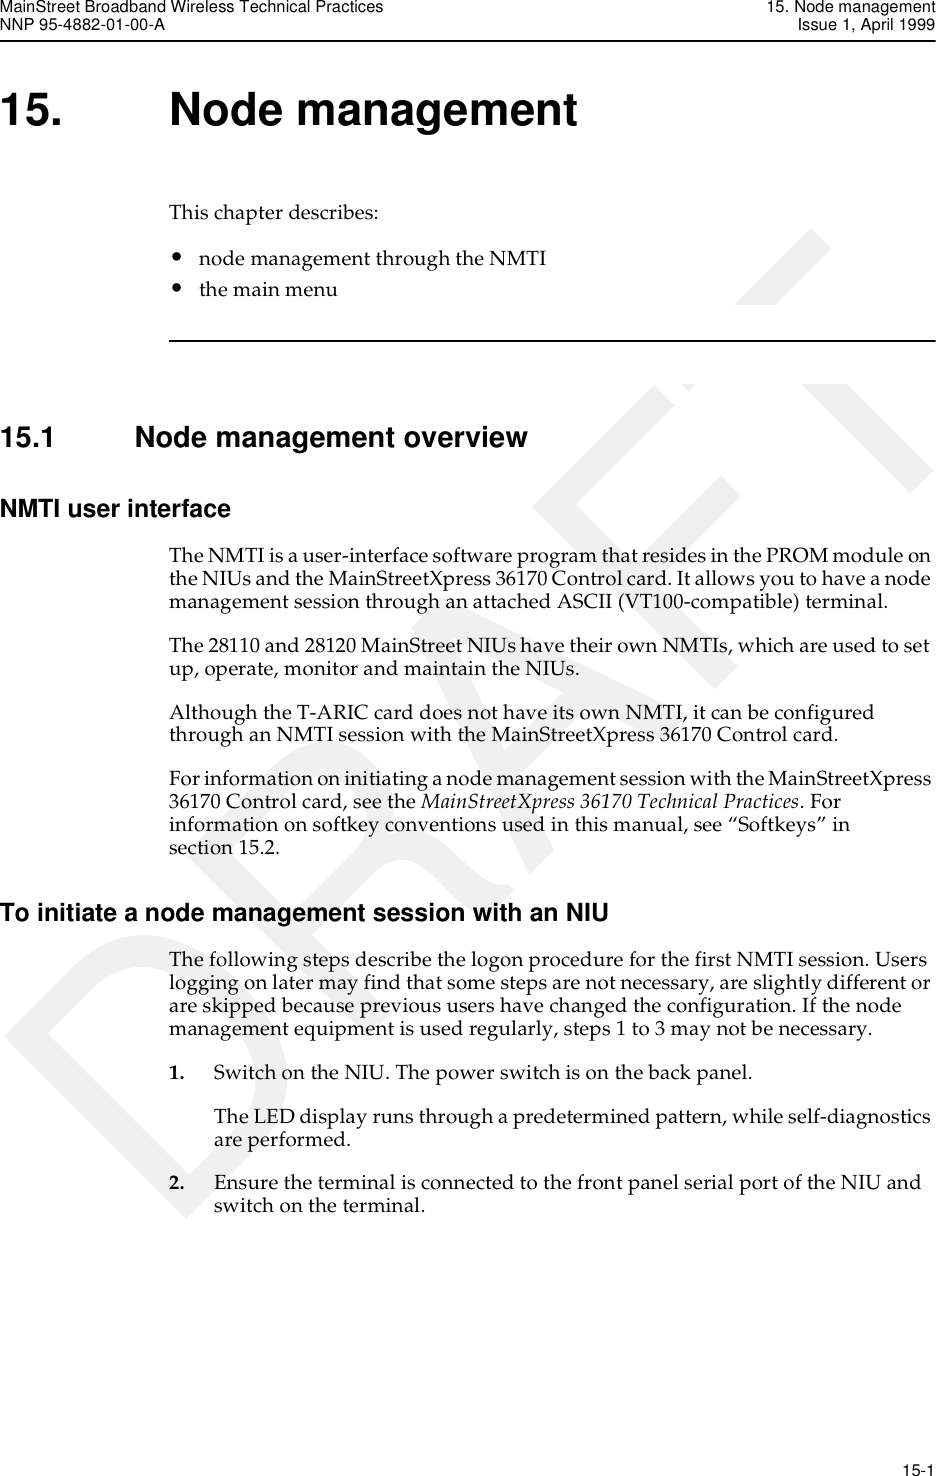 MainStreet Broadband Wireless Technical Practices 15. Node managementNNP 95-4882-01-00-A Issue 1, April 1999   15-1DRAFT15. Node managementThis chapter describes:•node management through the NMTI•the main menu15.1 Node management overviewNMTI user interfaceThe NMTI is a user-interface software program that resides in the PROM module on the NIUs and the MainStreetXpress 36170 Control card. It allows you to have a node management session through an attached ASCII (VT100-compatible) terminal. The 28110 and 28120 MainStreet NIUs have their own NMTIs, which are used to set up, operate, monitor and maintain the NIUs.Although the T-ARIC card does not have its own NMTI, it can be configured through an NMTI session with the MainStreetXpress 36170 Control card. For information on initiating a node management session with the MainStreetXpress 36170 Control card, see the MainStreetXpress 36170 Technical Practices. For information on softkey conventions used in this manual, see “Softkeys” in section 15.2.To initiate a node management session with an NIUThe following steps describe the logon procedure for the first NMTI session. Users logging on later may find that some steps are not necessary, are slightly different or are skipped because previous users have changed the configuration. If the node management equipment is used regularly, steps 1 to 3 may not be necessary.1. Switch on the NIU. The power switch is on the back panel.The LED display runs through a predetermined pattern, while self-diagnostics are performed.2. Ensure the terminal is connected to the front panel serial port of the NIU and switch on the terminal.